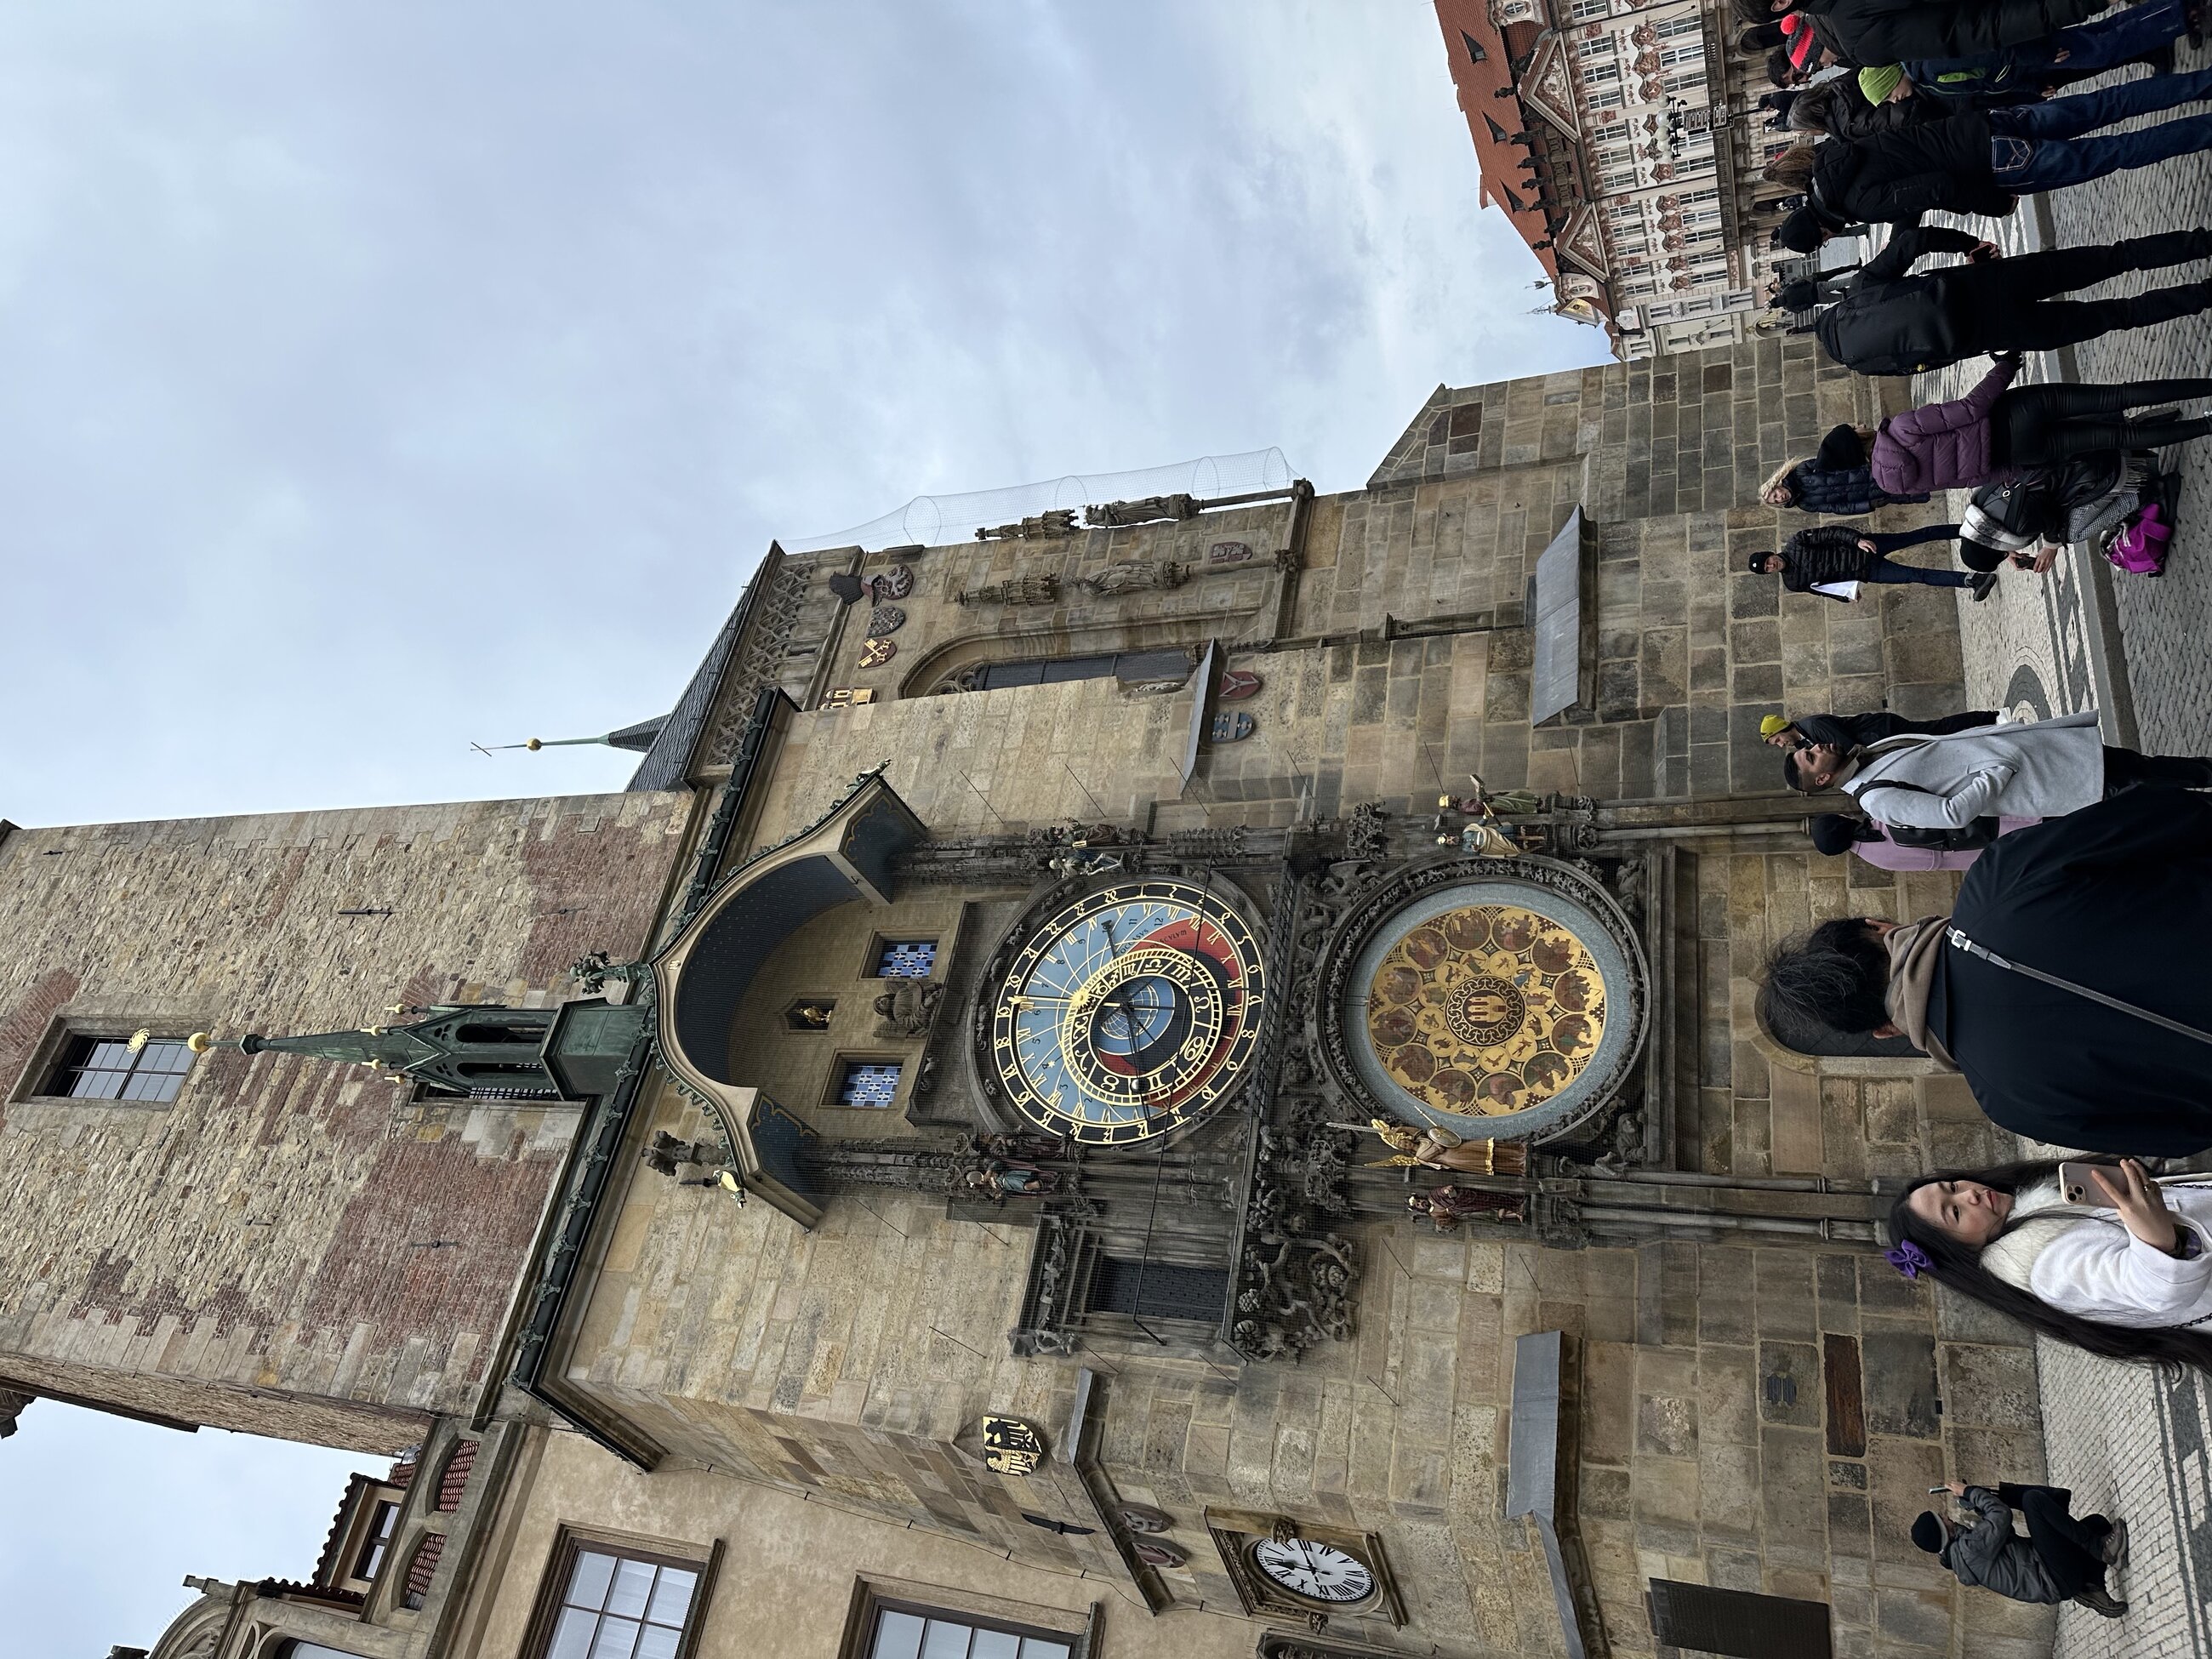 This is a photo on my first day of the program, right outside of the Astronomical Clock in the center of Prague!